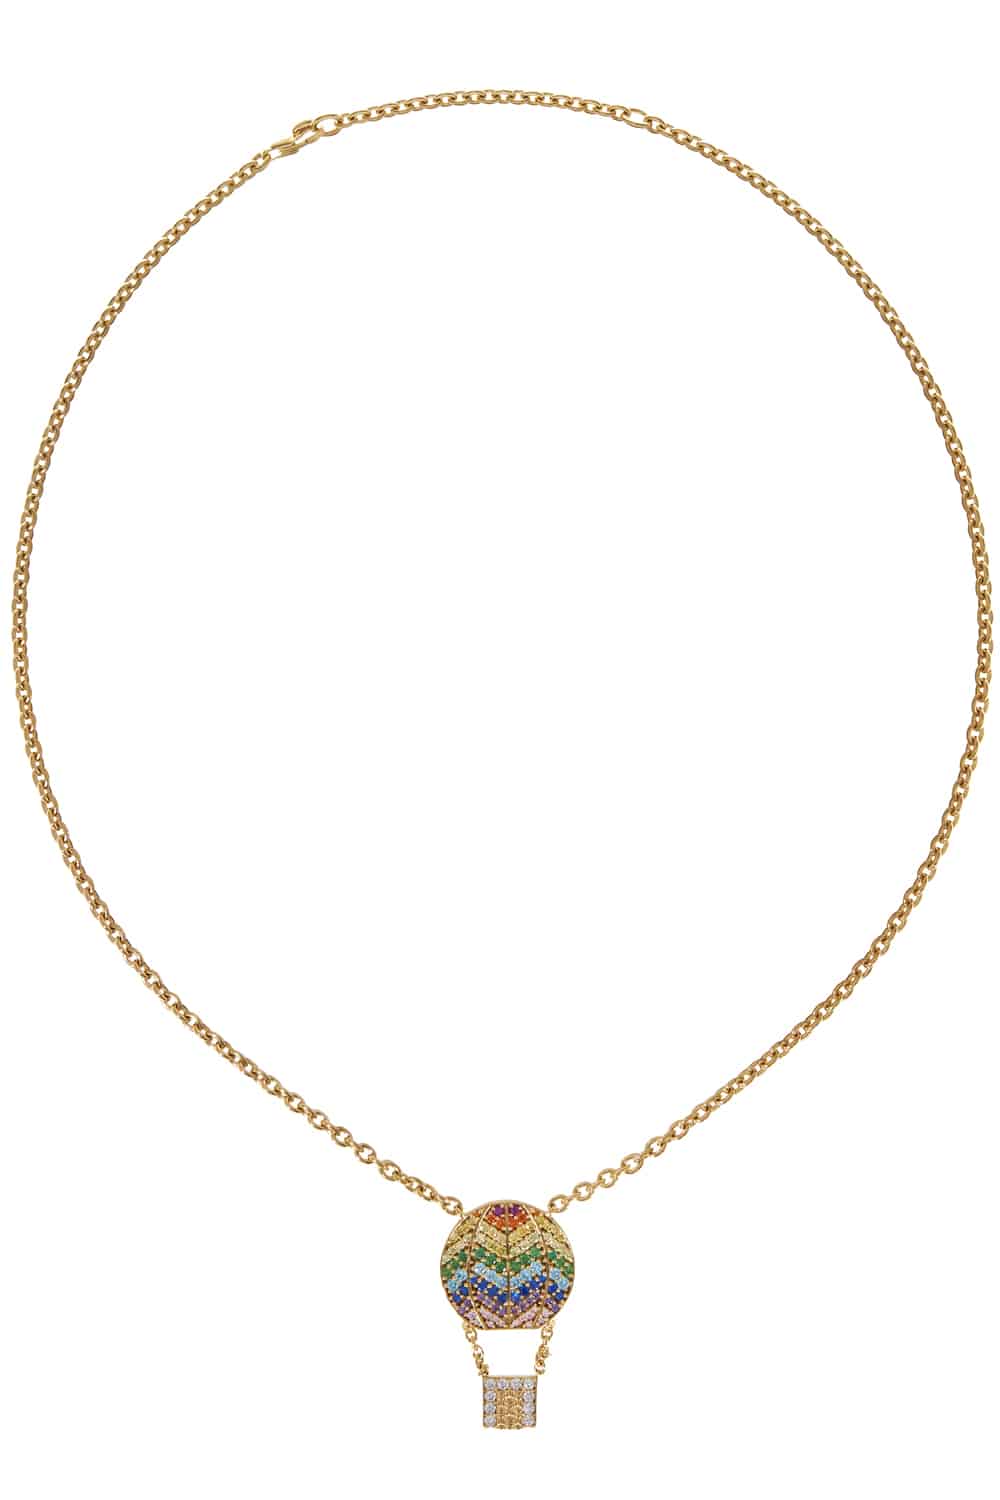 Dee Hilfiger Debuts Judith Leiber Jewelry – The Hollywood Reporter